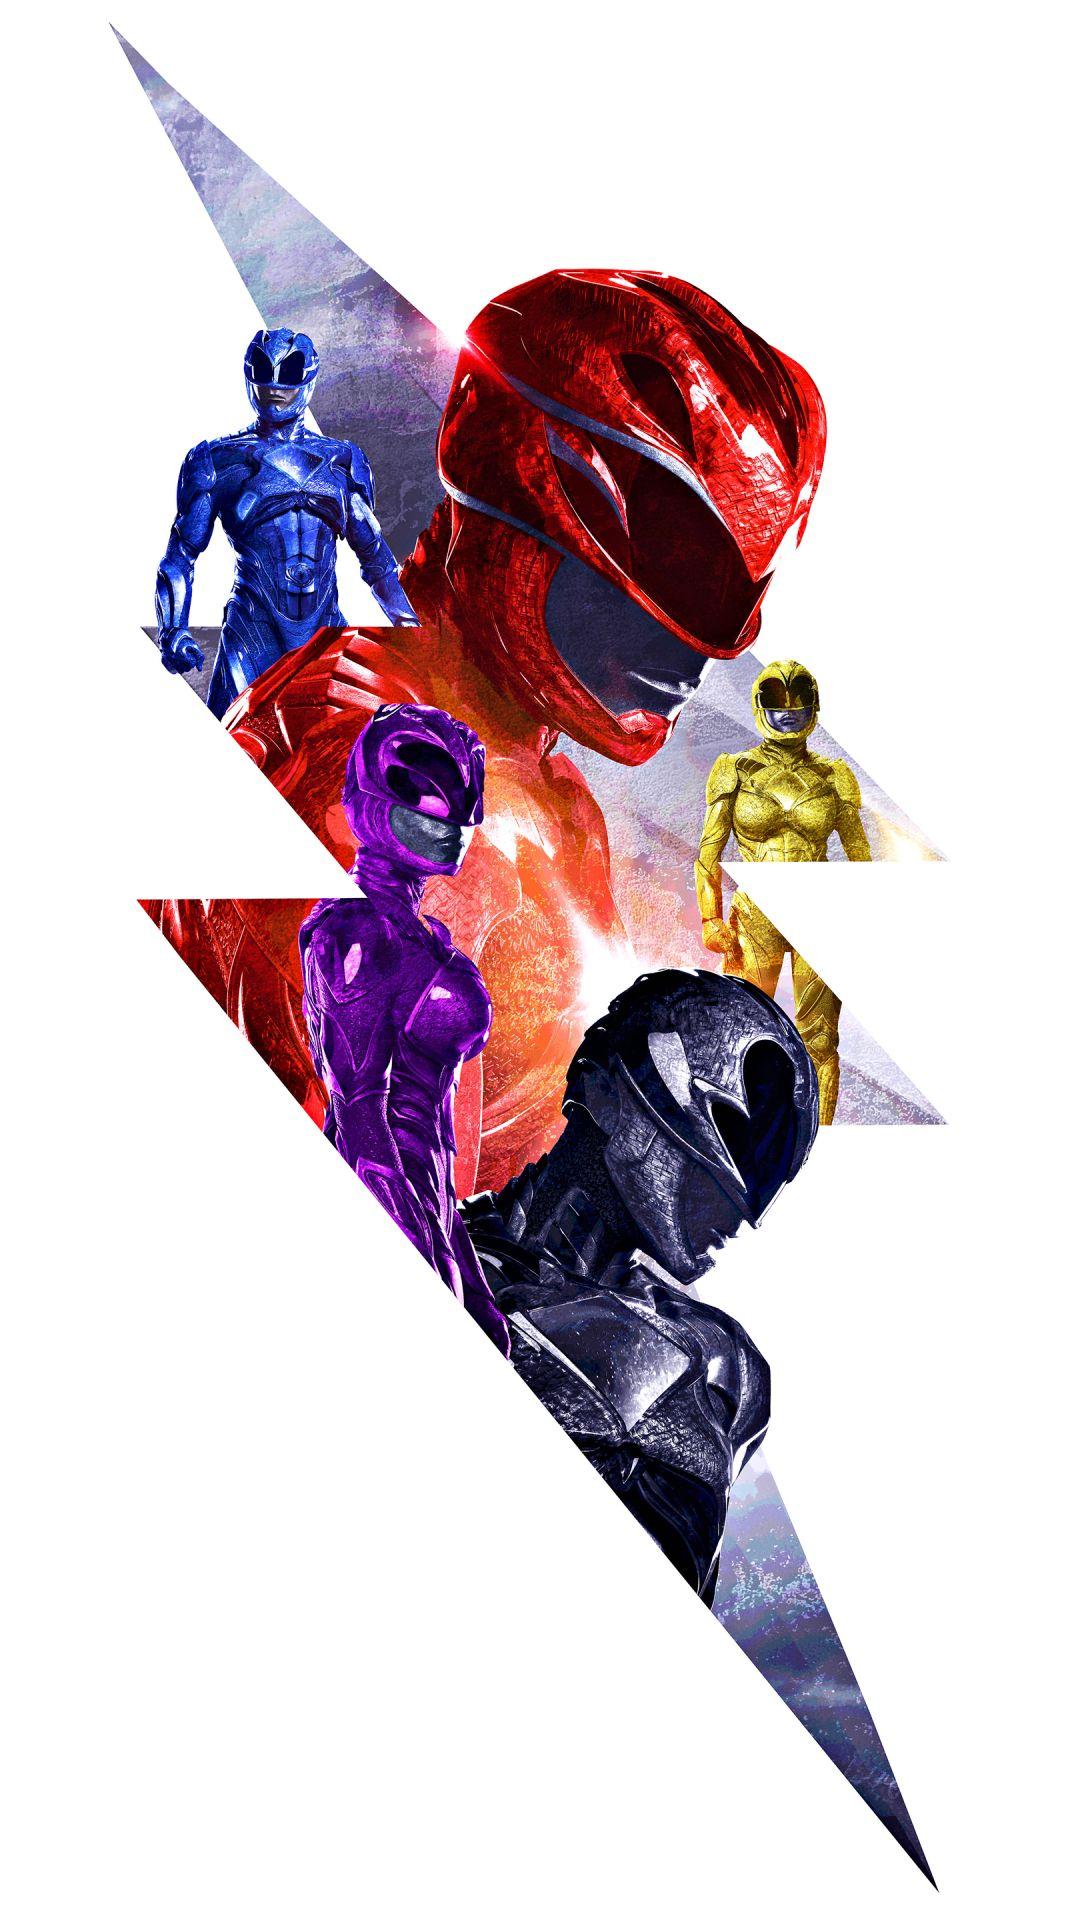 40+ Power Rangers HD Wallpapers and Backgrounds